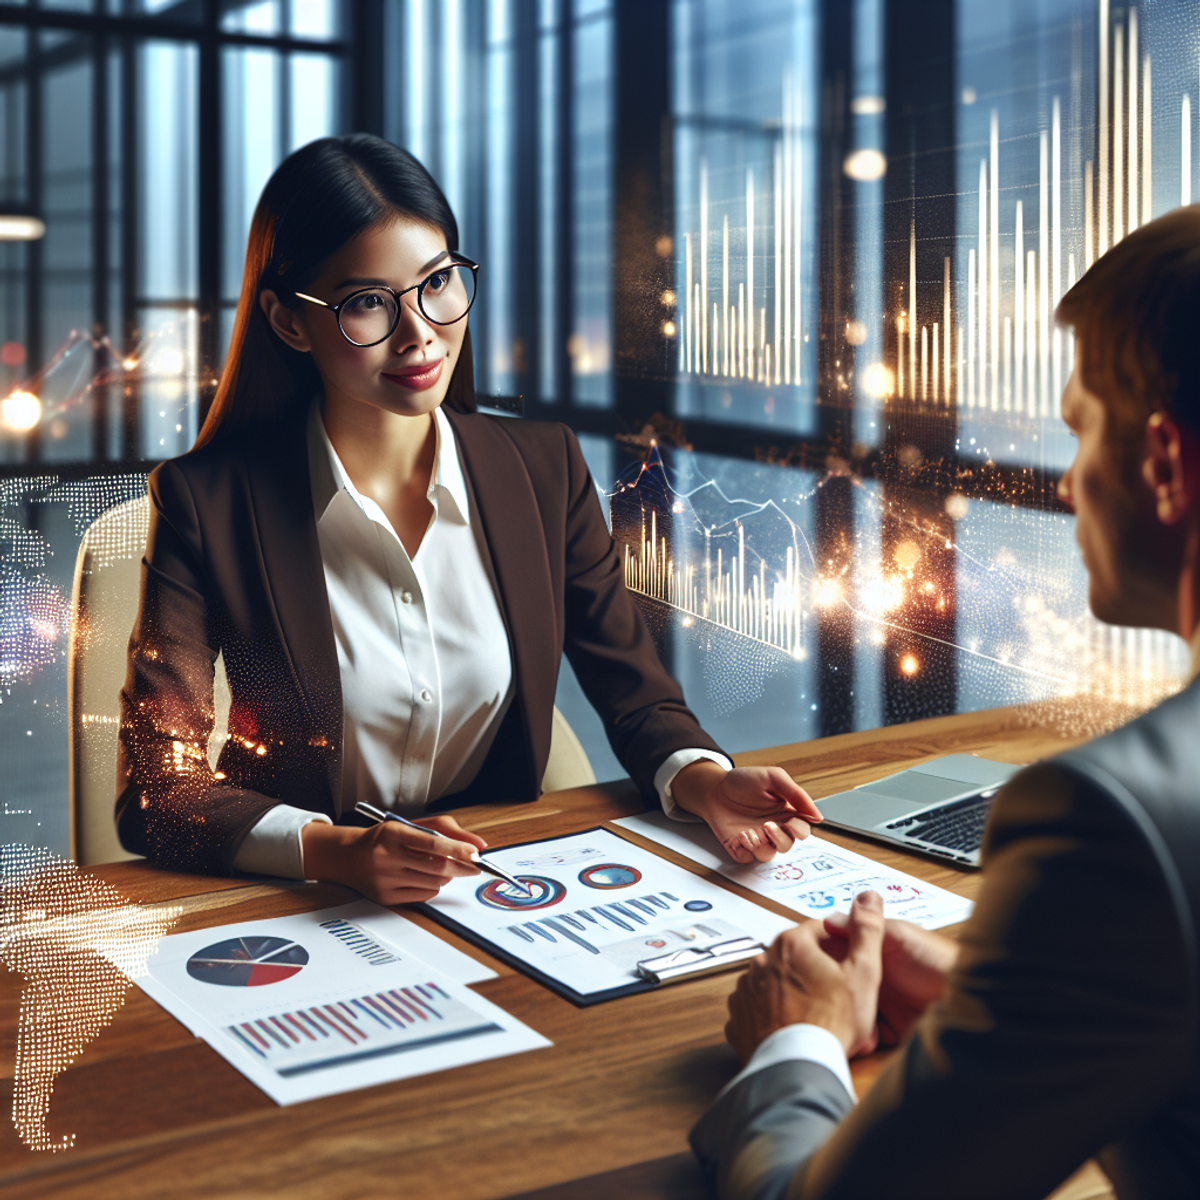 A professional East Asian female financial advisor in business attire, with glasses, sitting at a mahogany desk filled with charts and graphs symbolizing financial growth, guiding a white male client wearing a smart casual outfit who is interactively engaging in the discussion. Both are in a brightly lit modern office room, surrounded by a glowing ambiance symbolizing financial success.